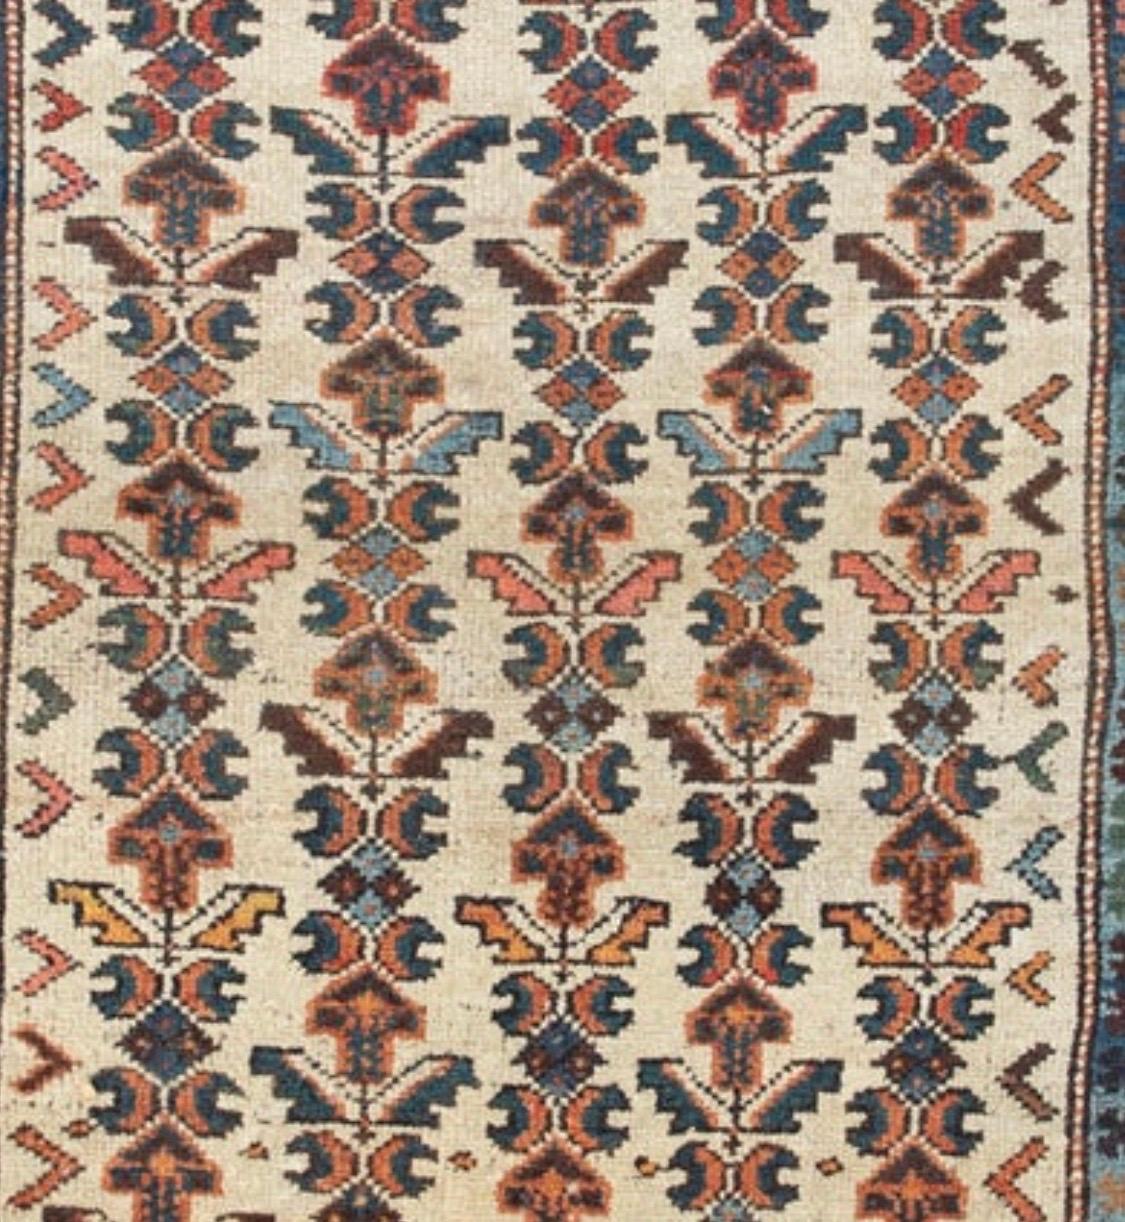 Hand-Knotted Antique Ivory Blue Tribal Persian Hamedan Rug, c. 1900-1910 (3.8 x 5.2 ft) For Sale